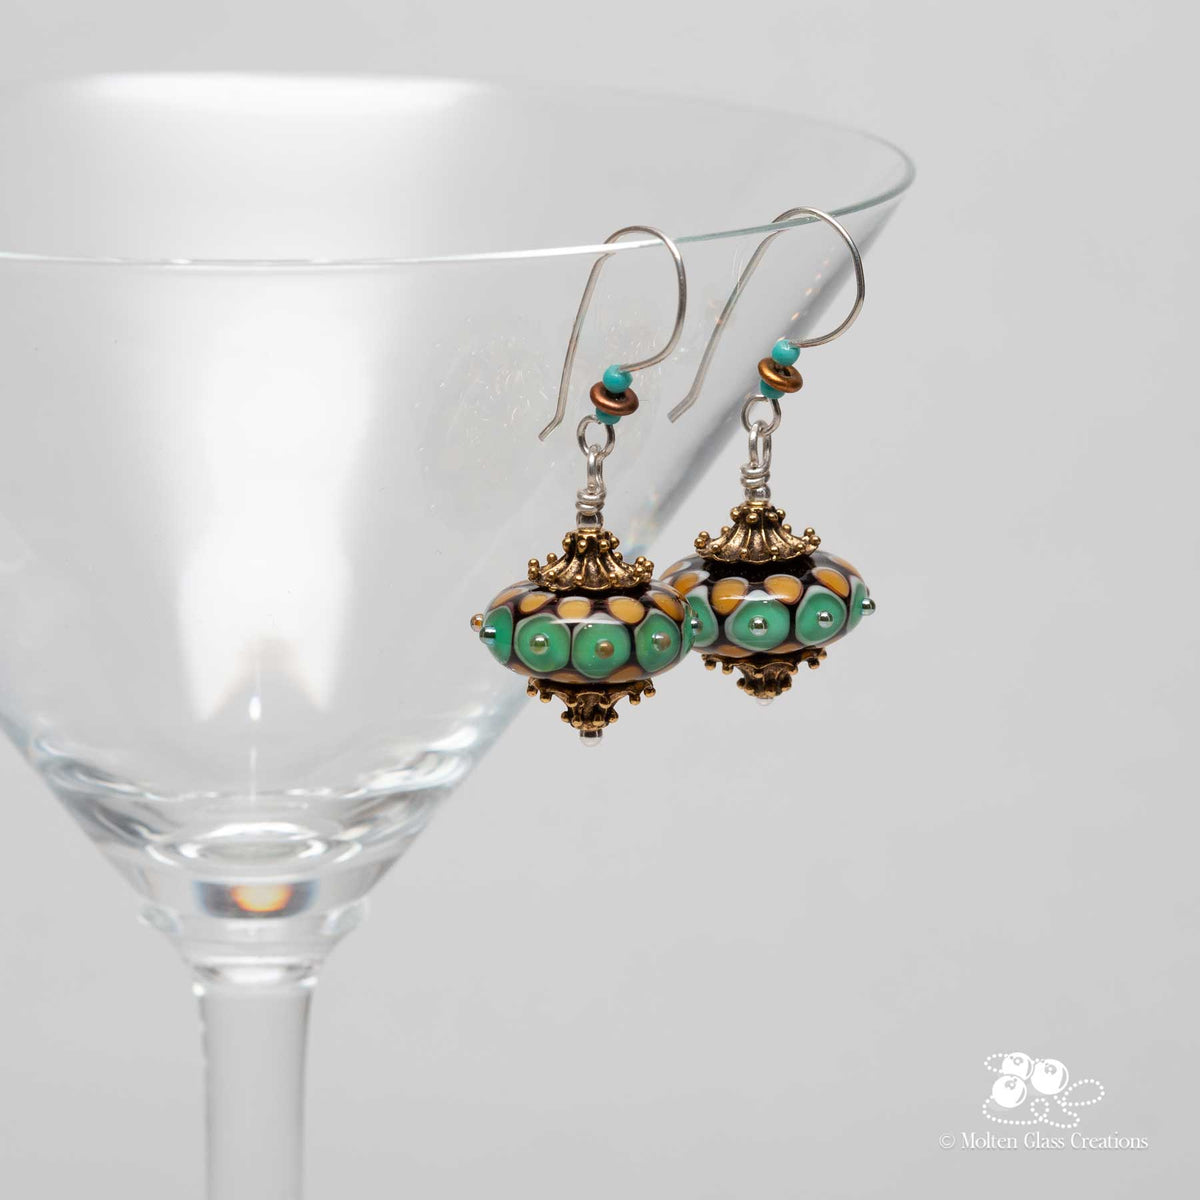 Vintage Teal Delight Earrings - Molten Glass Creations